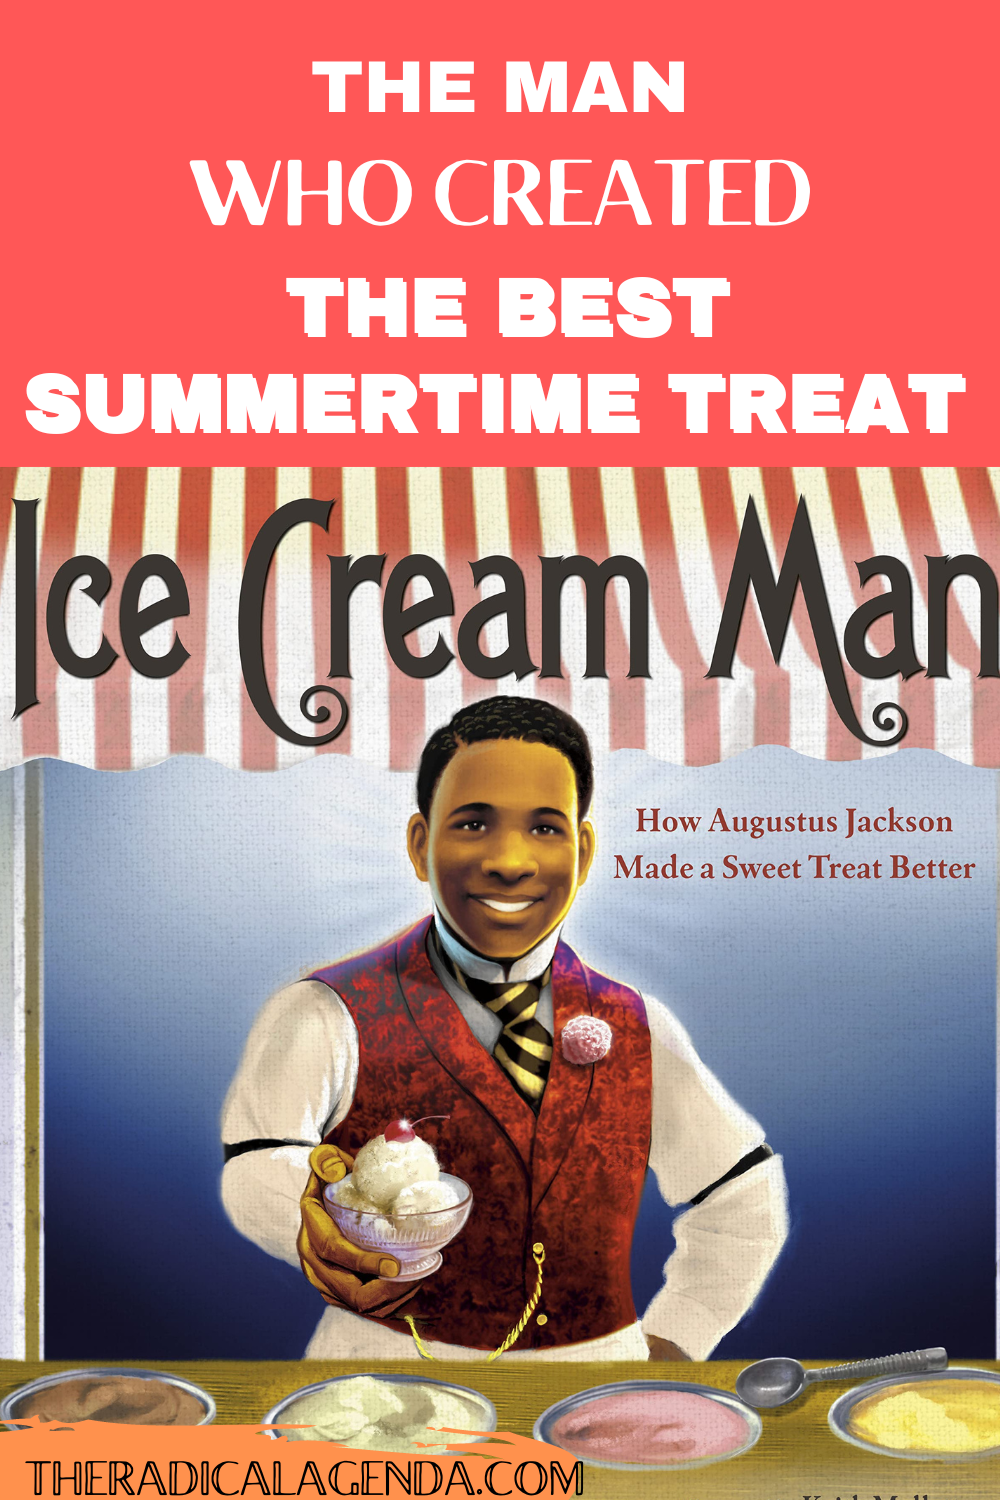 The man who created the best summertime treat above the cover for Ice Cream Man, featuring an illustration of Augustus Jackson offering a cup of ice cream from his cart